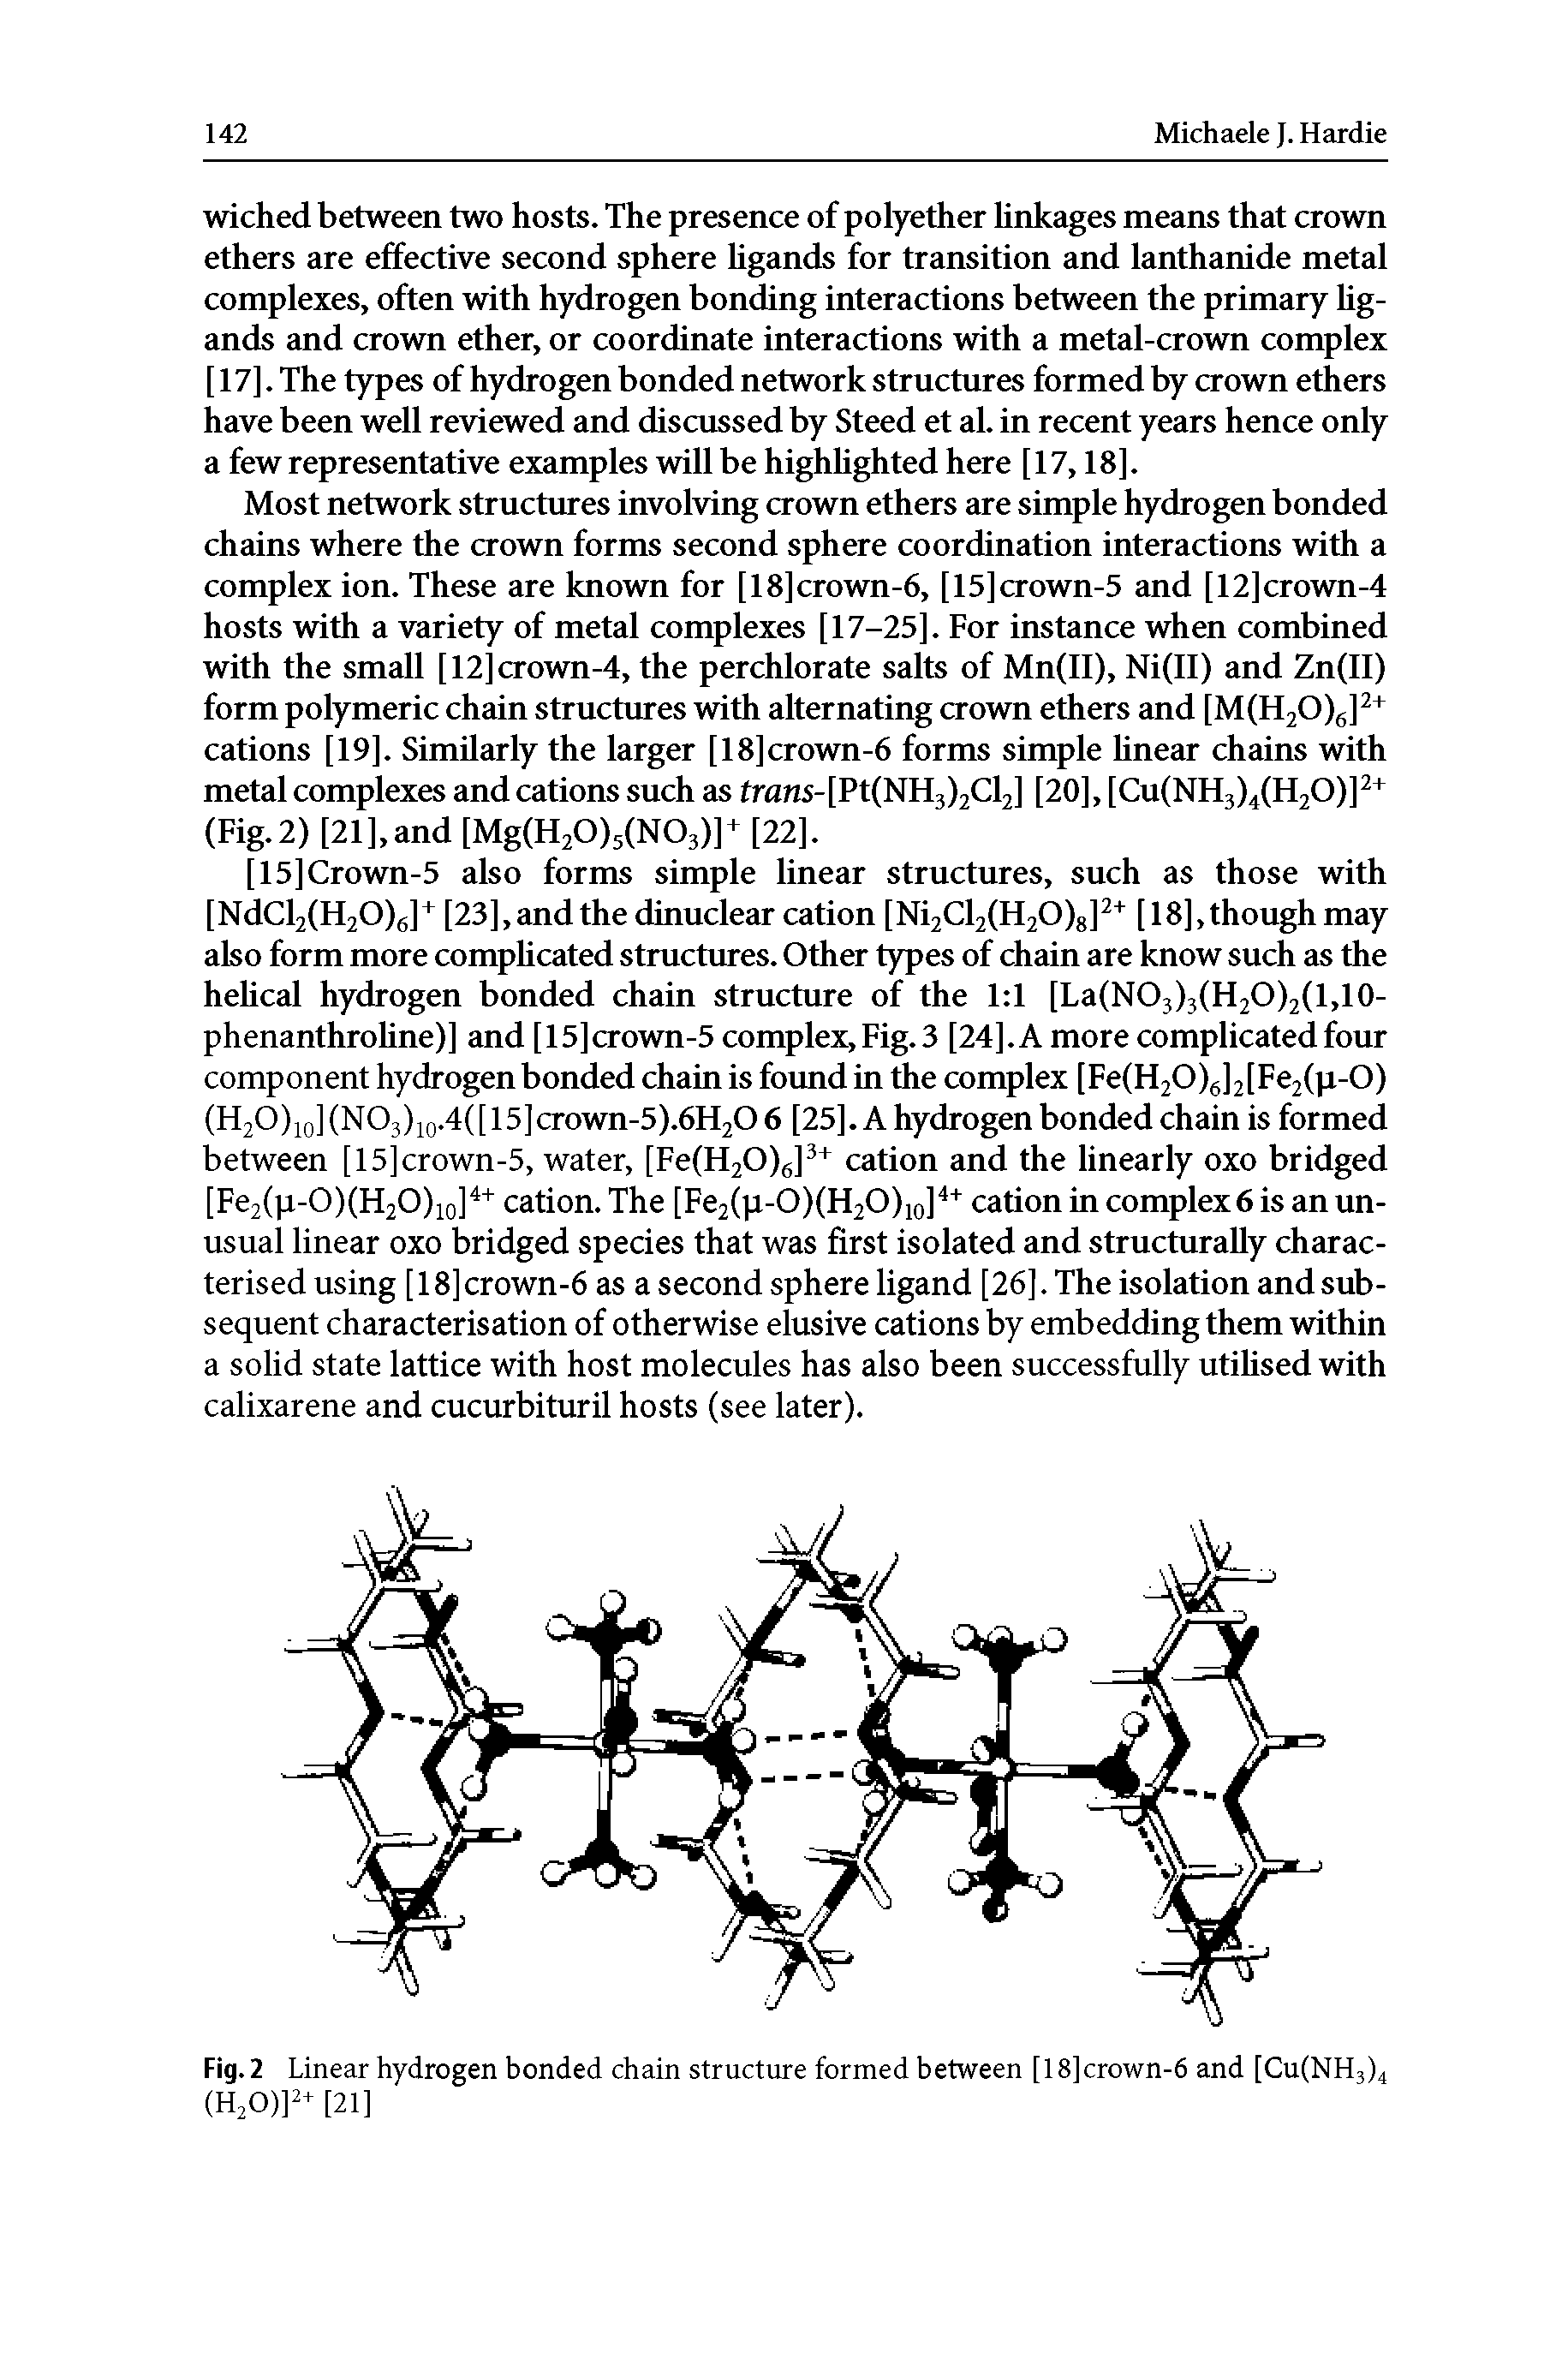 Fig. 2 Linear hydrogen bonded chain structure formed between [18]crown-6 and [Cu(NH3)4 (H20)P [21]...